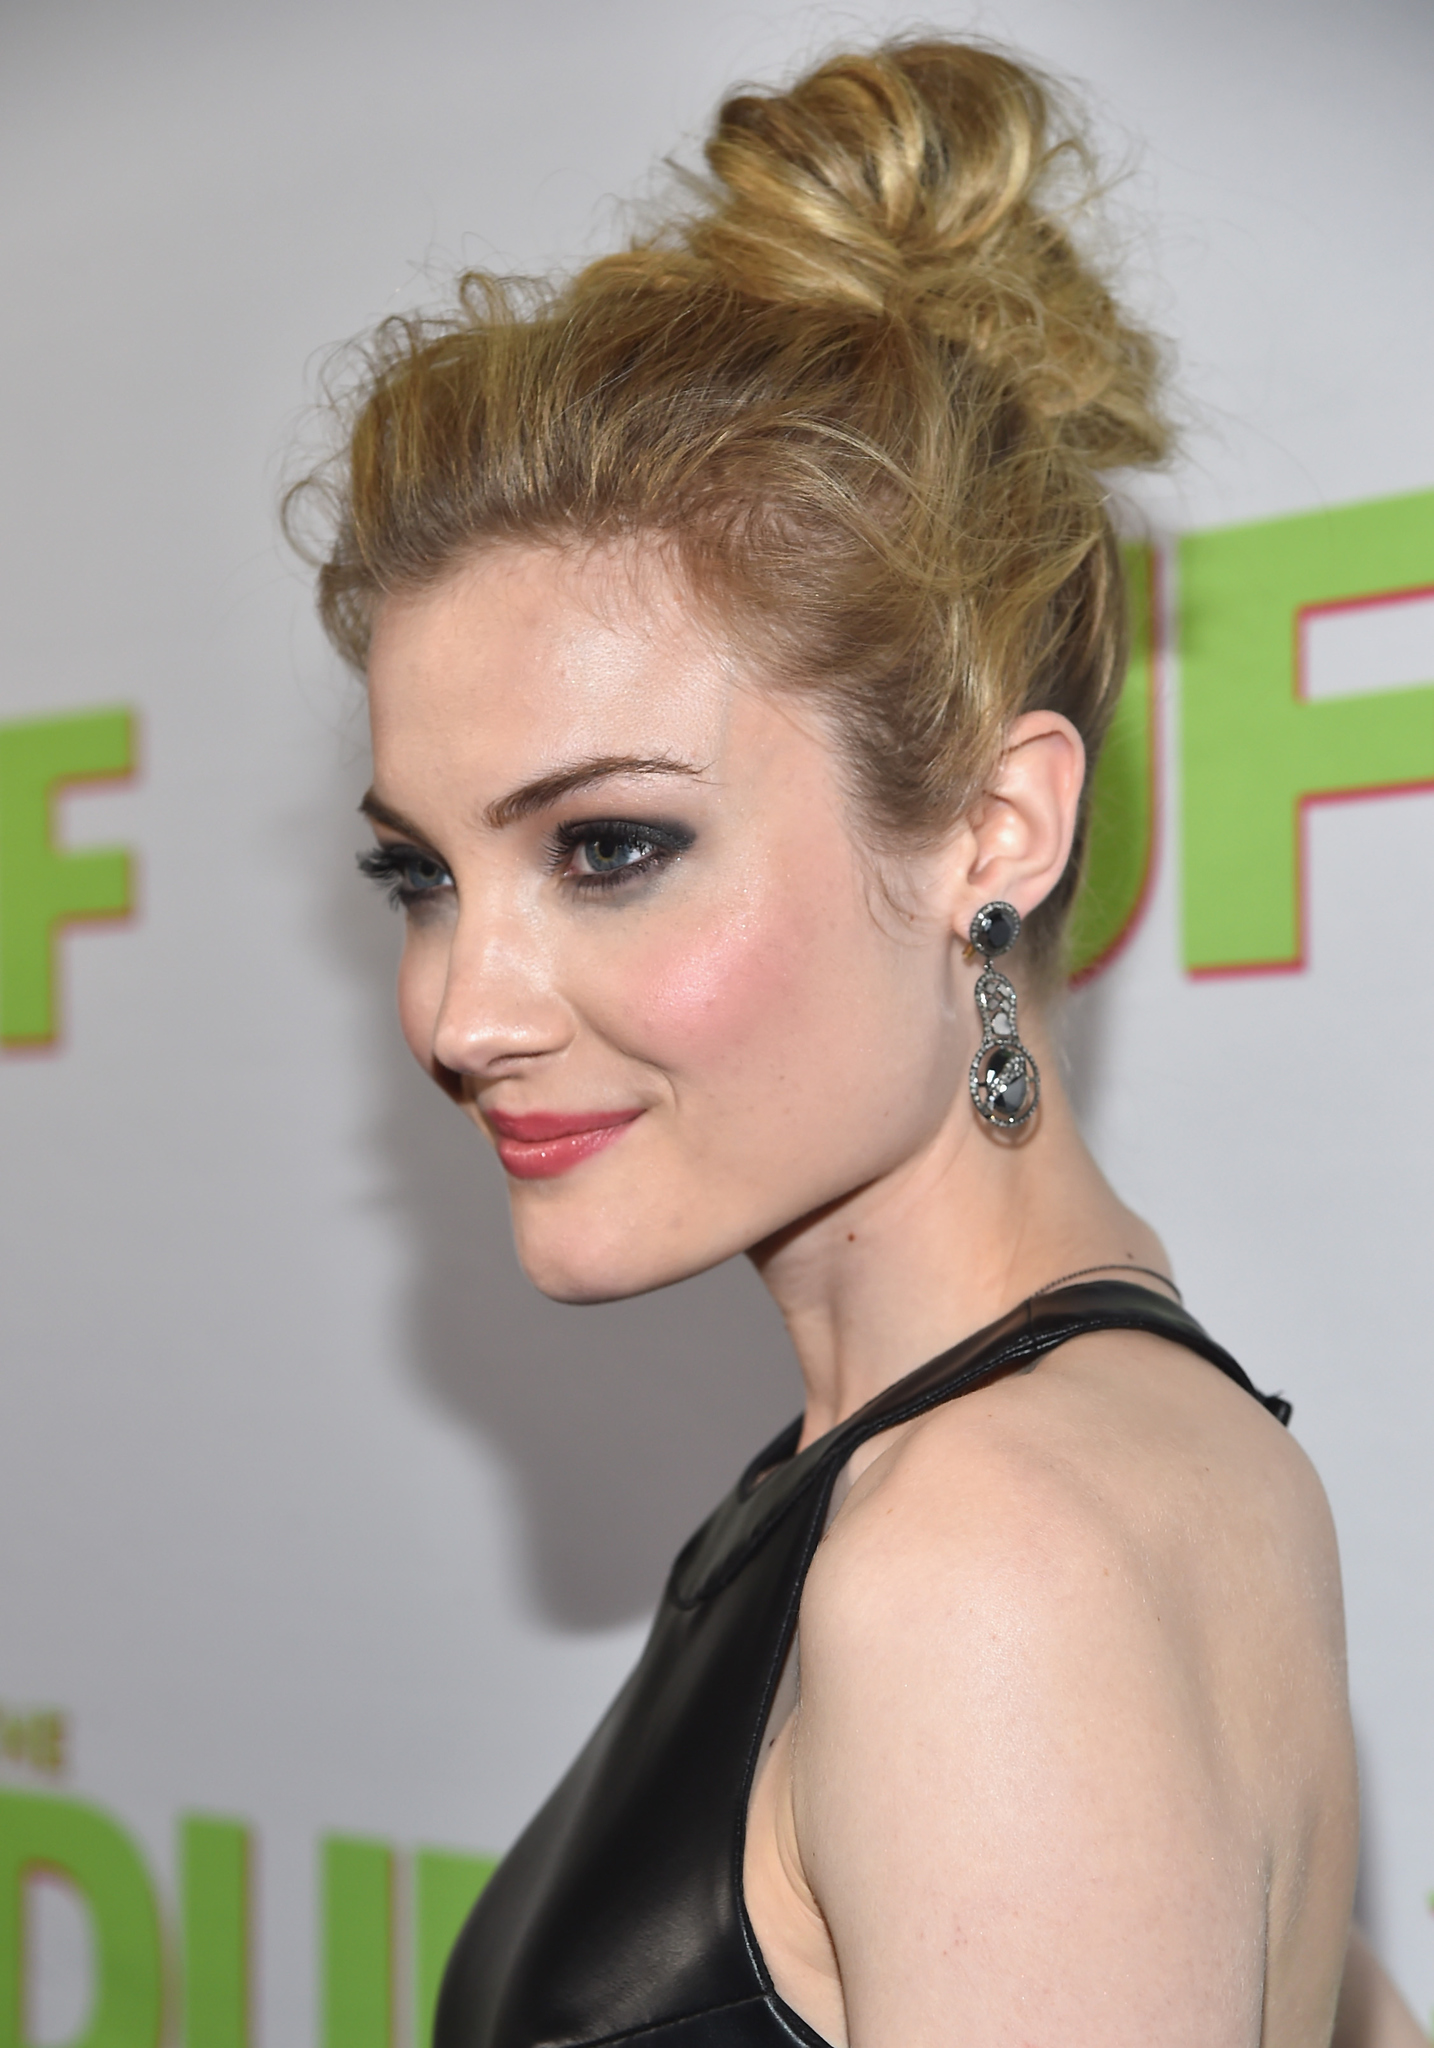 Skyler Samuels at event of The DUFF (2015)